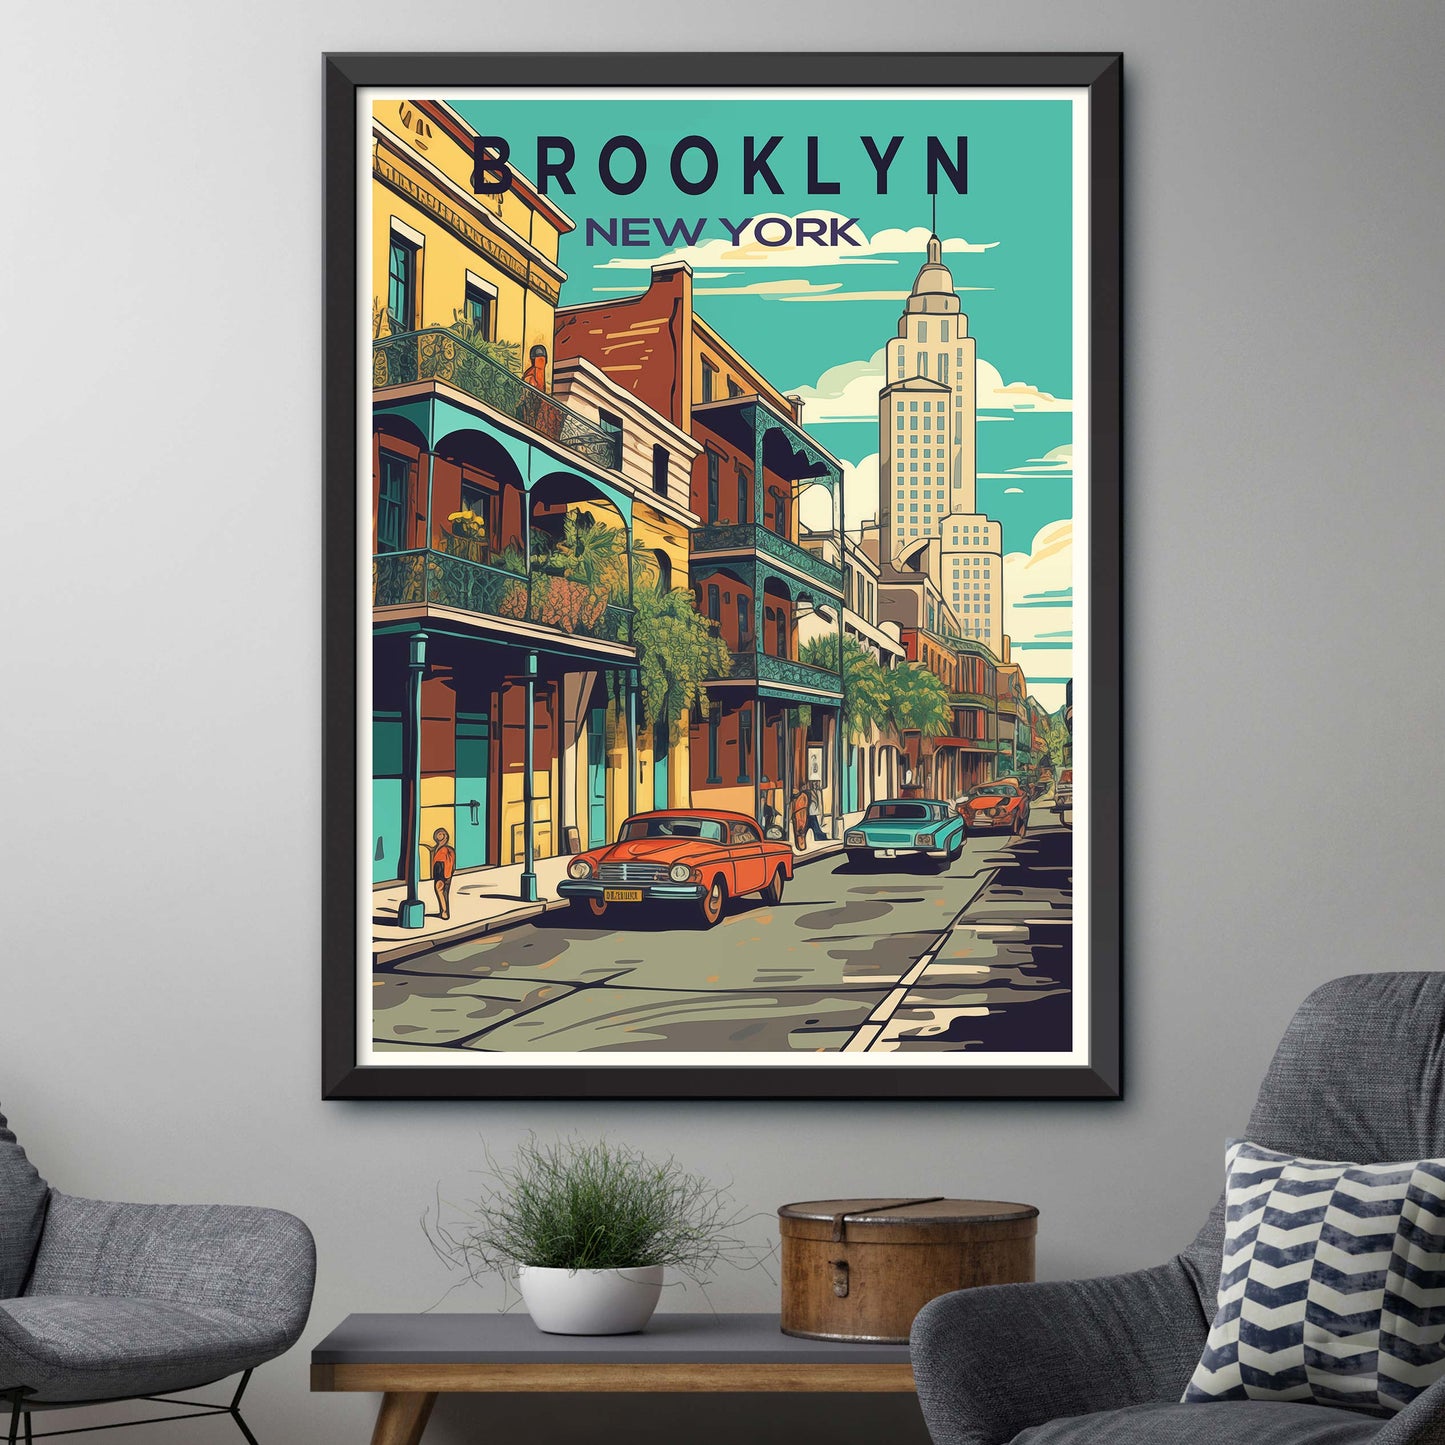 Brooklyn Perspectives: A Tribute to New York's Borough